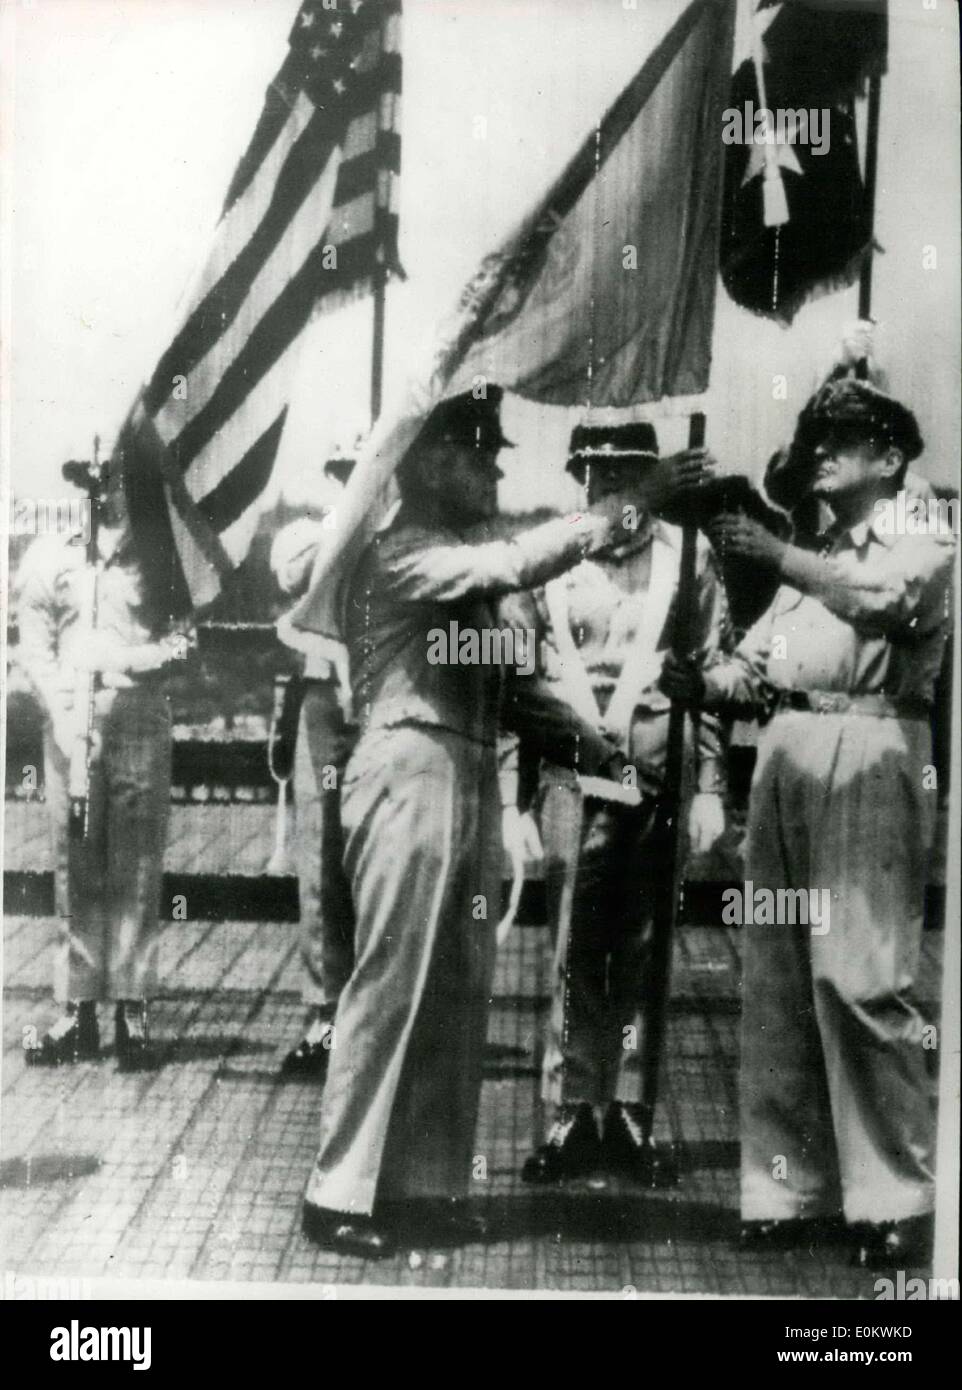 Jul. 17, 1950 - General Douglas MacArthur Receive United Nations Flag. OPS: Picture just received shows General J. Lawton Collins (left) presenting the United Nations flag to General Douglas MacArthur (right), on the roof of the Dai Ichi building in Tokyo, MacArthur's headquarters. Stock Photo